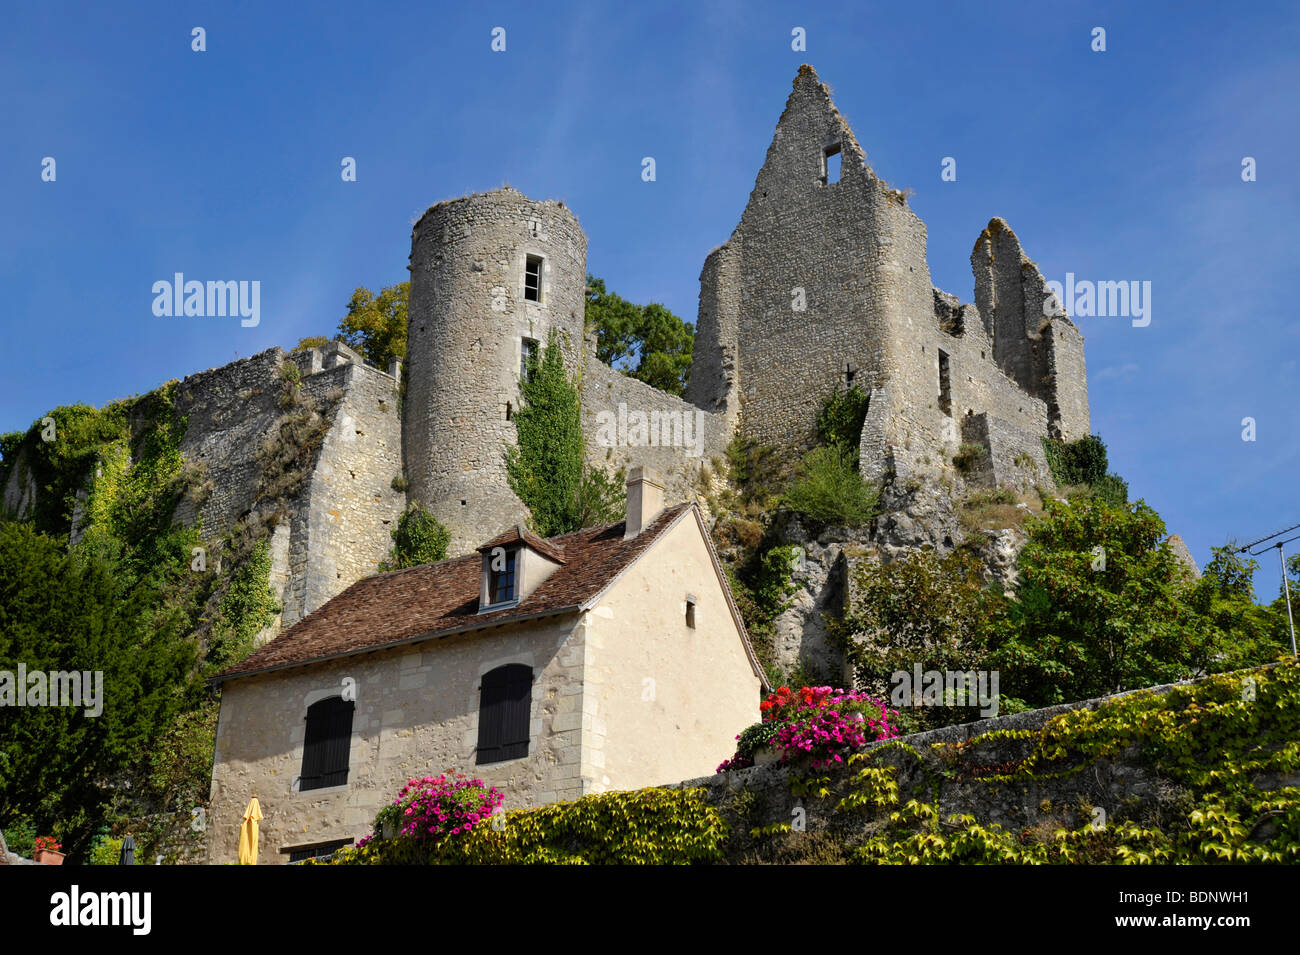 old medieval chateau ruins in the town of Angles sur l' Anglin, France Stock Photo